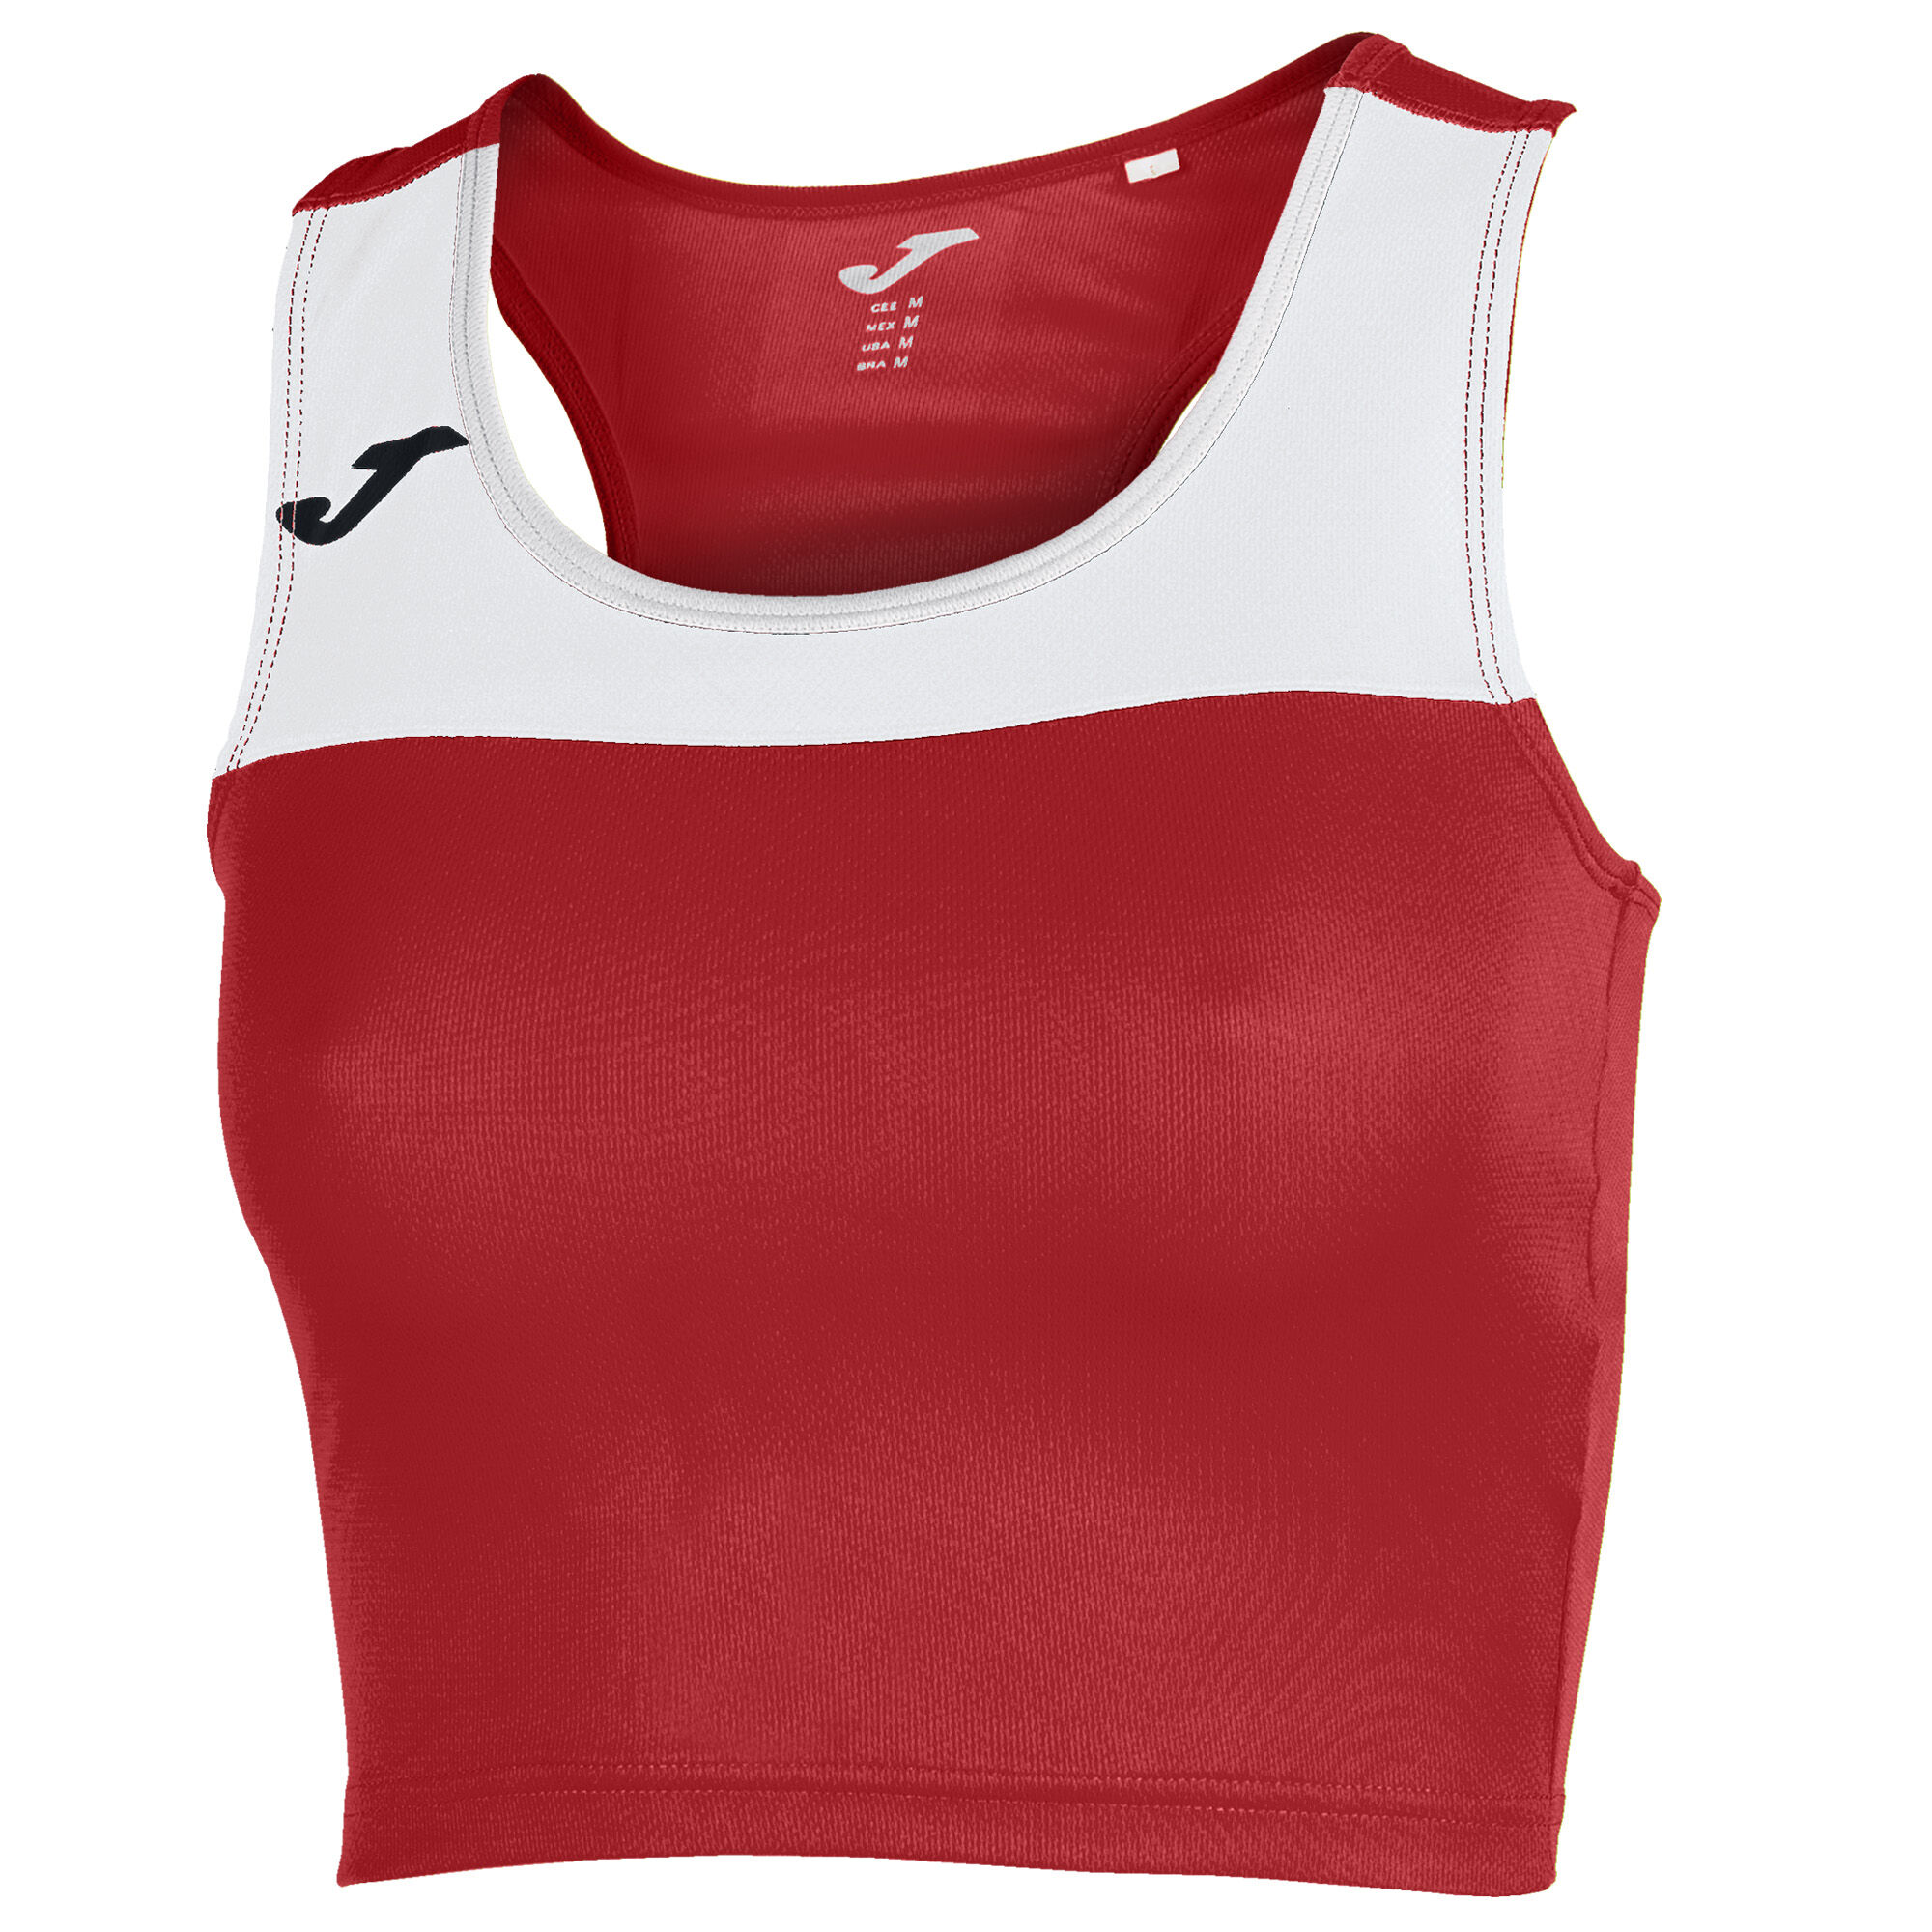 TOP DONNA RACE ROSSO BIANCO